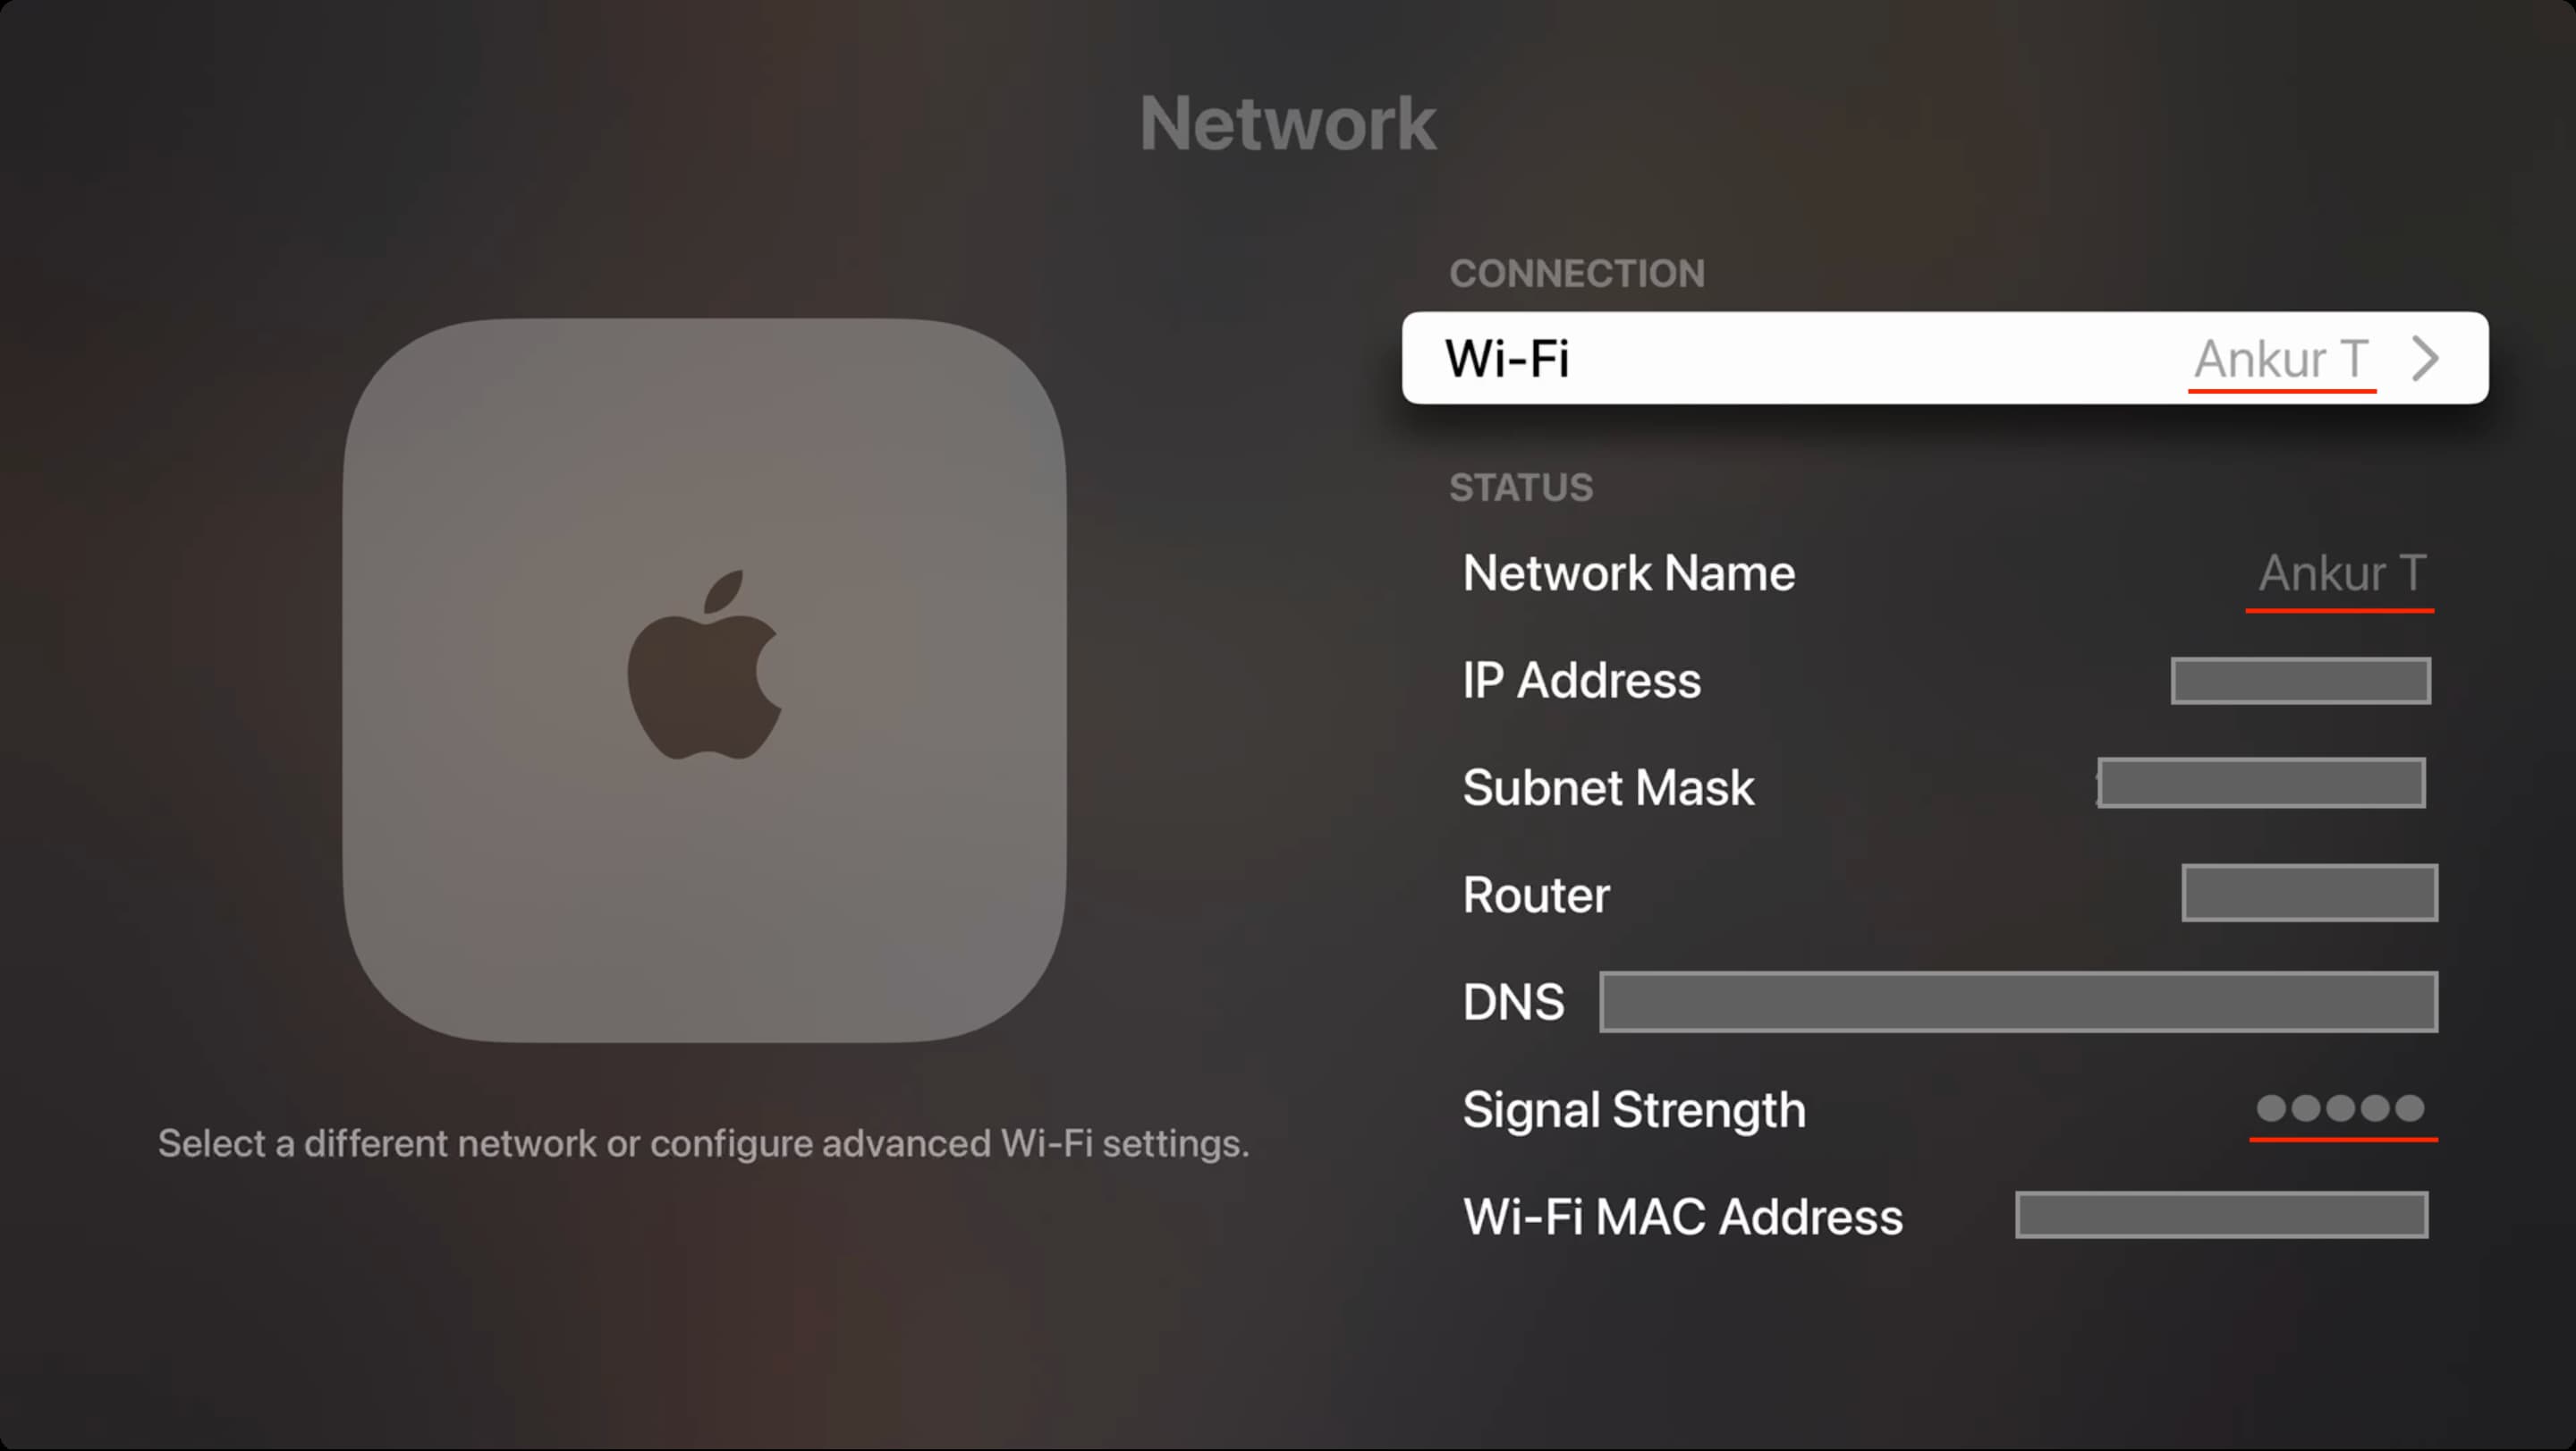 Wi-Fi settings screen on Apple TV showing the connected Wi-Fi network and the Wi-Fi signal strength